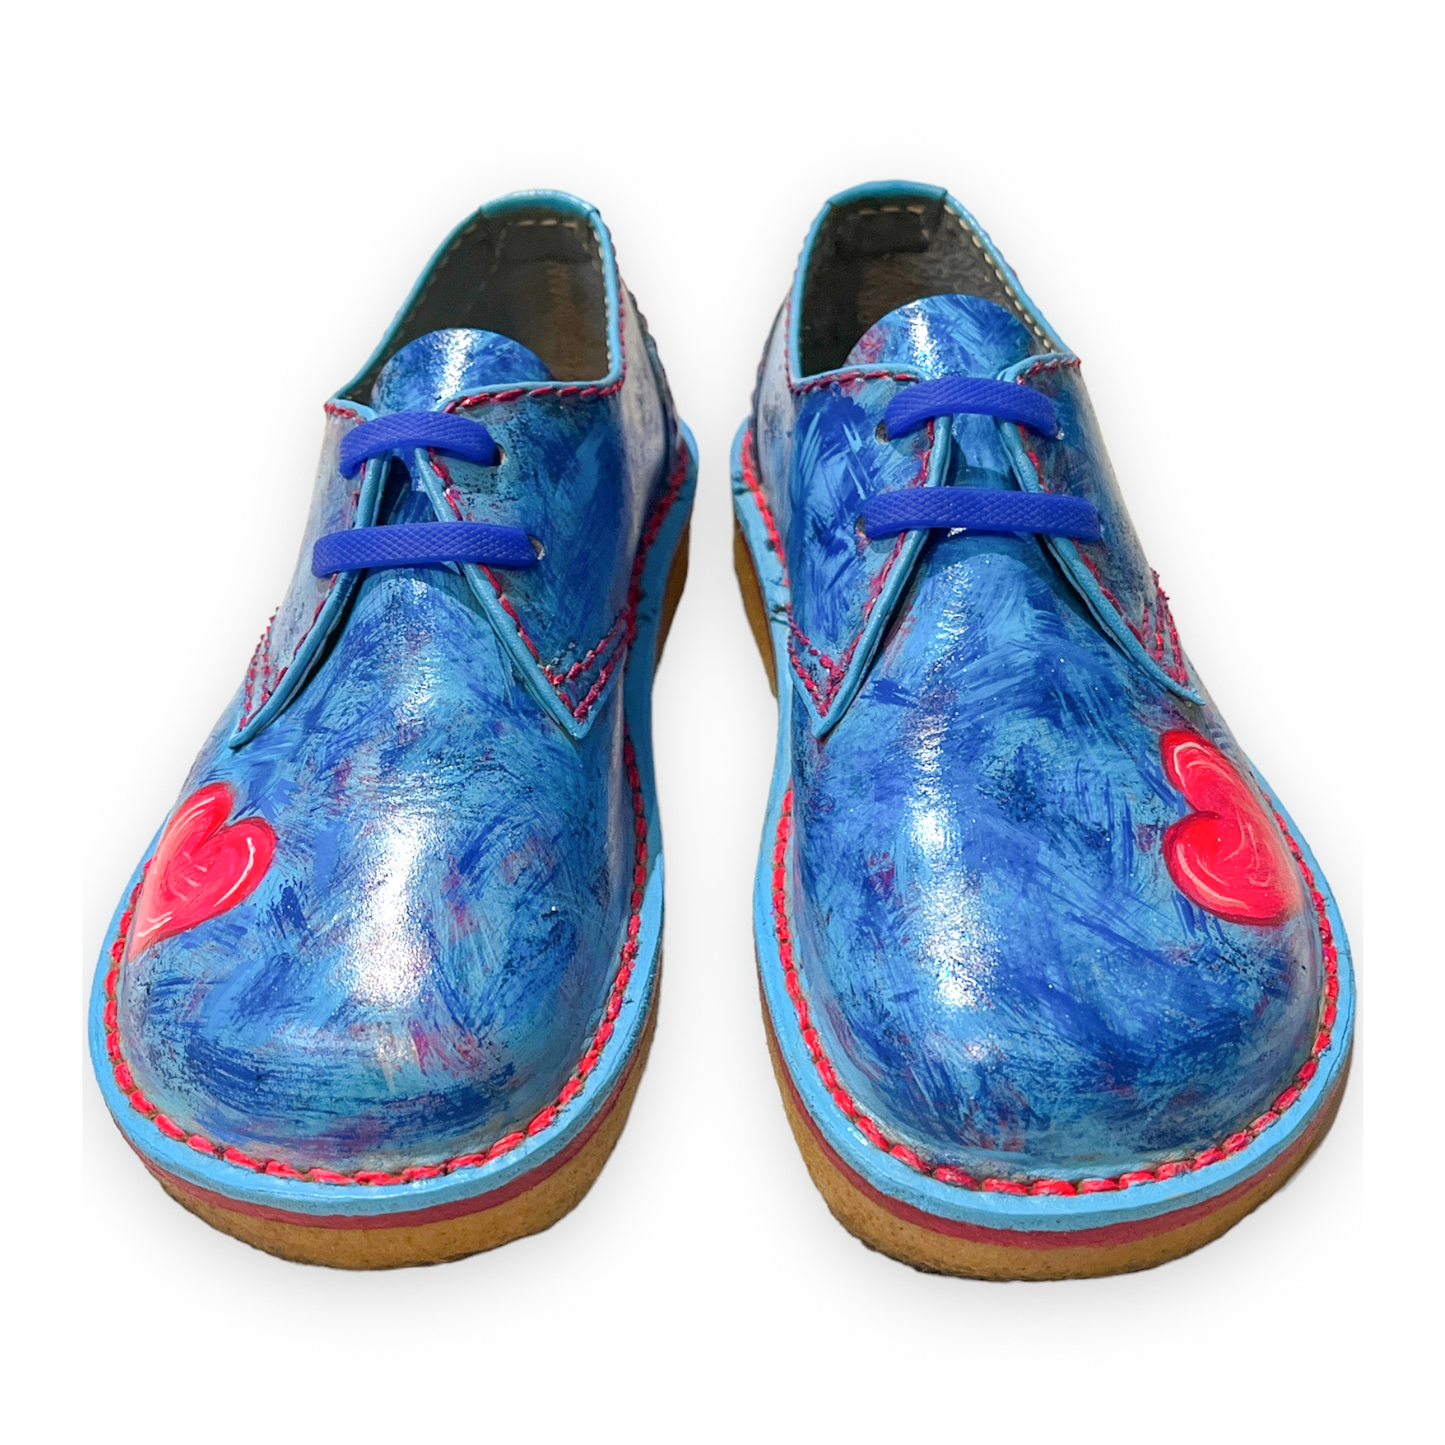 "Cold Hearted" - Duckfeet USA Shoes - Size 37 (US 7) - Hand Painted by Skye De La Rosa